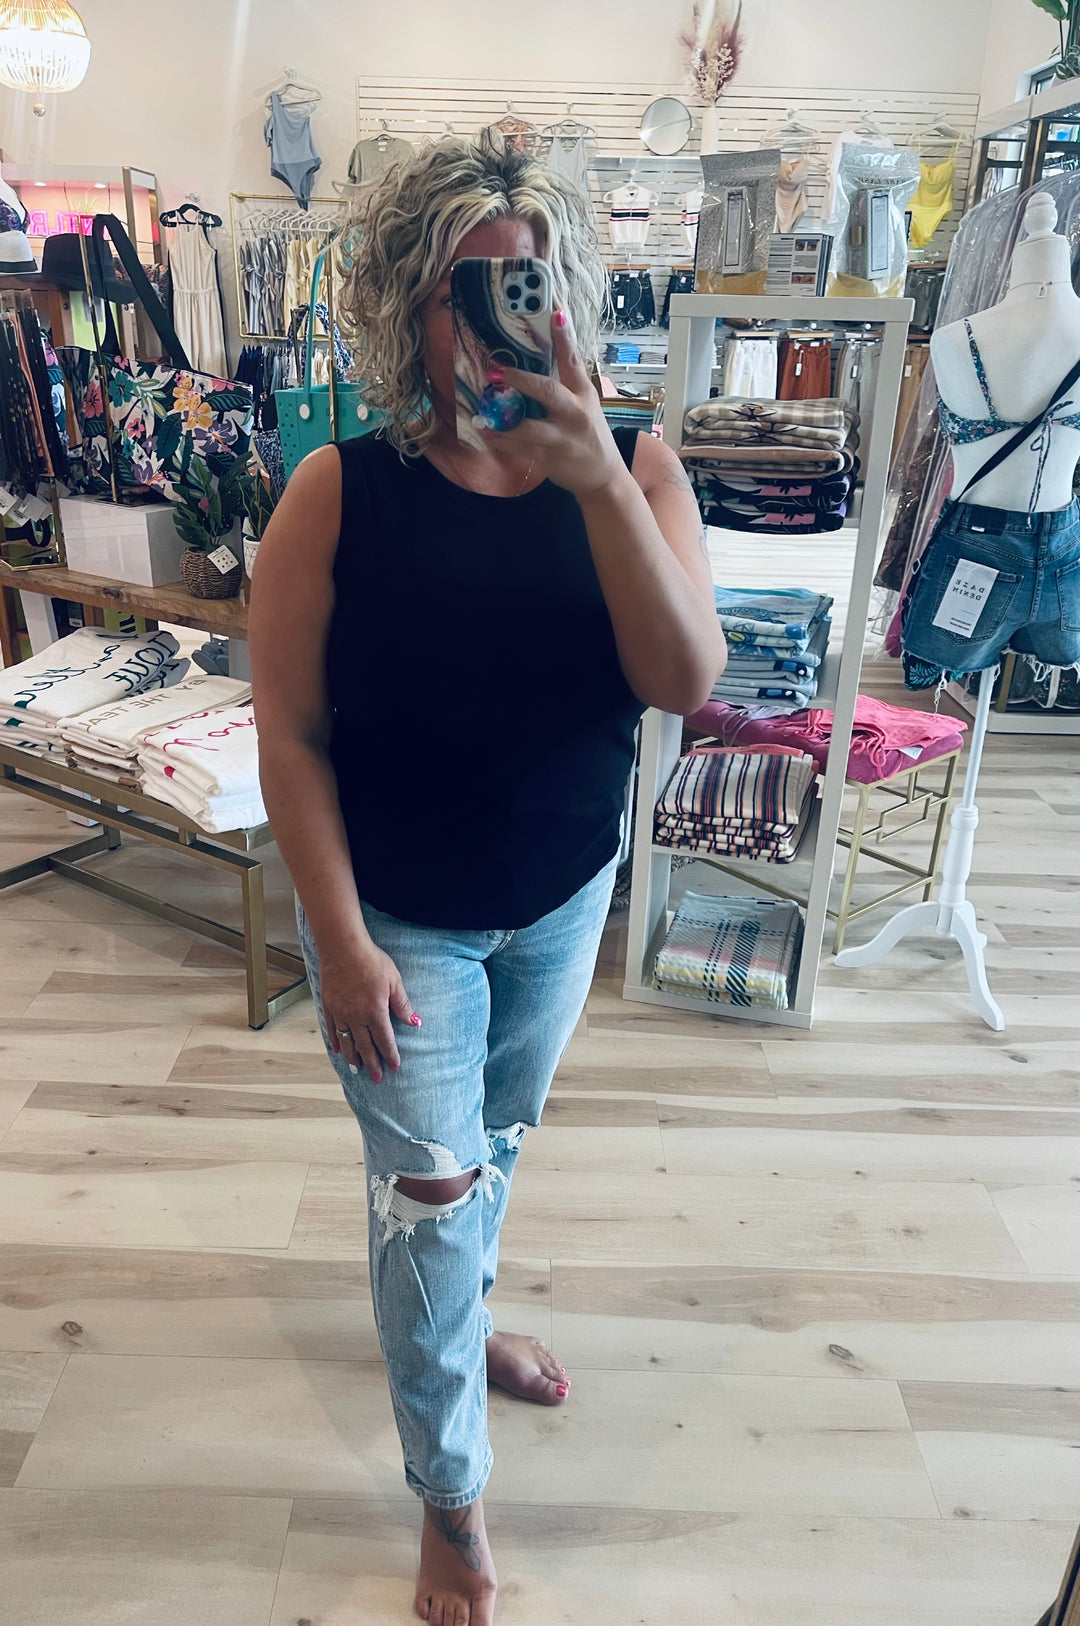 Daze Original High Rise Mom Jean in Sweet Thing - The Teal Antler Boutique